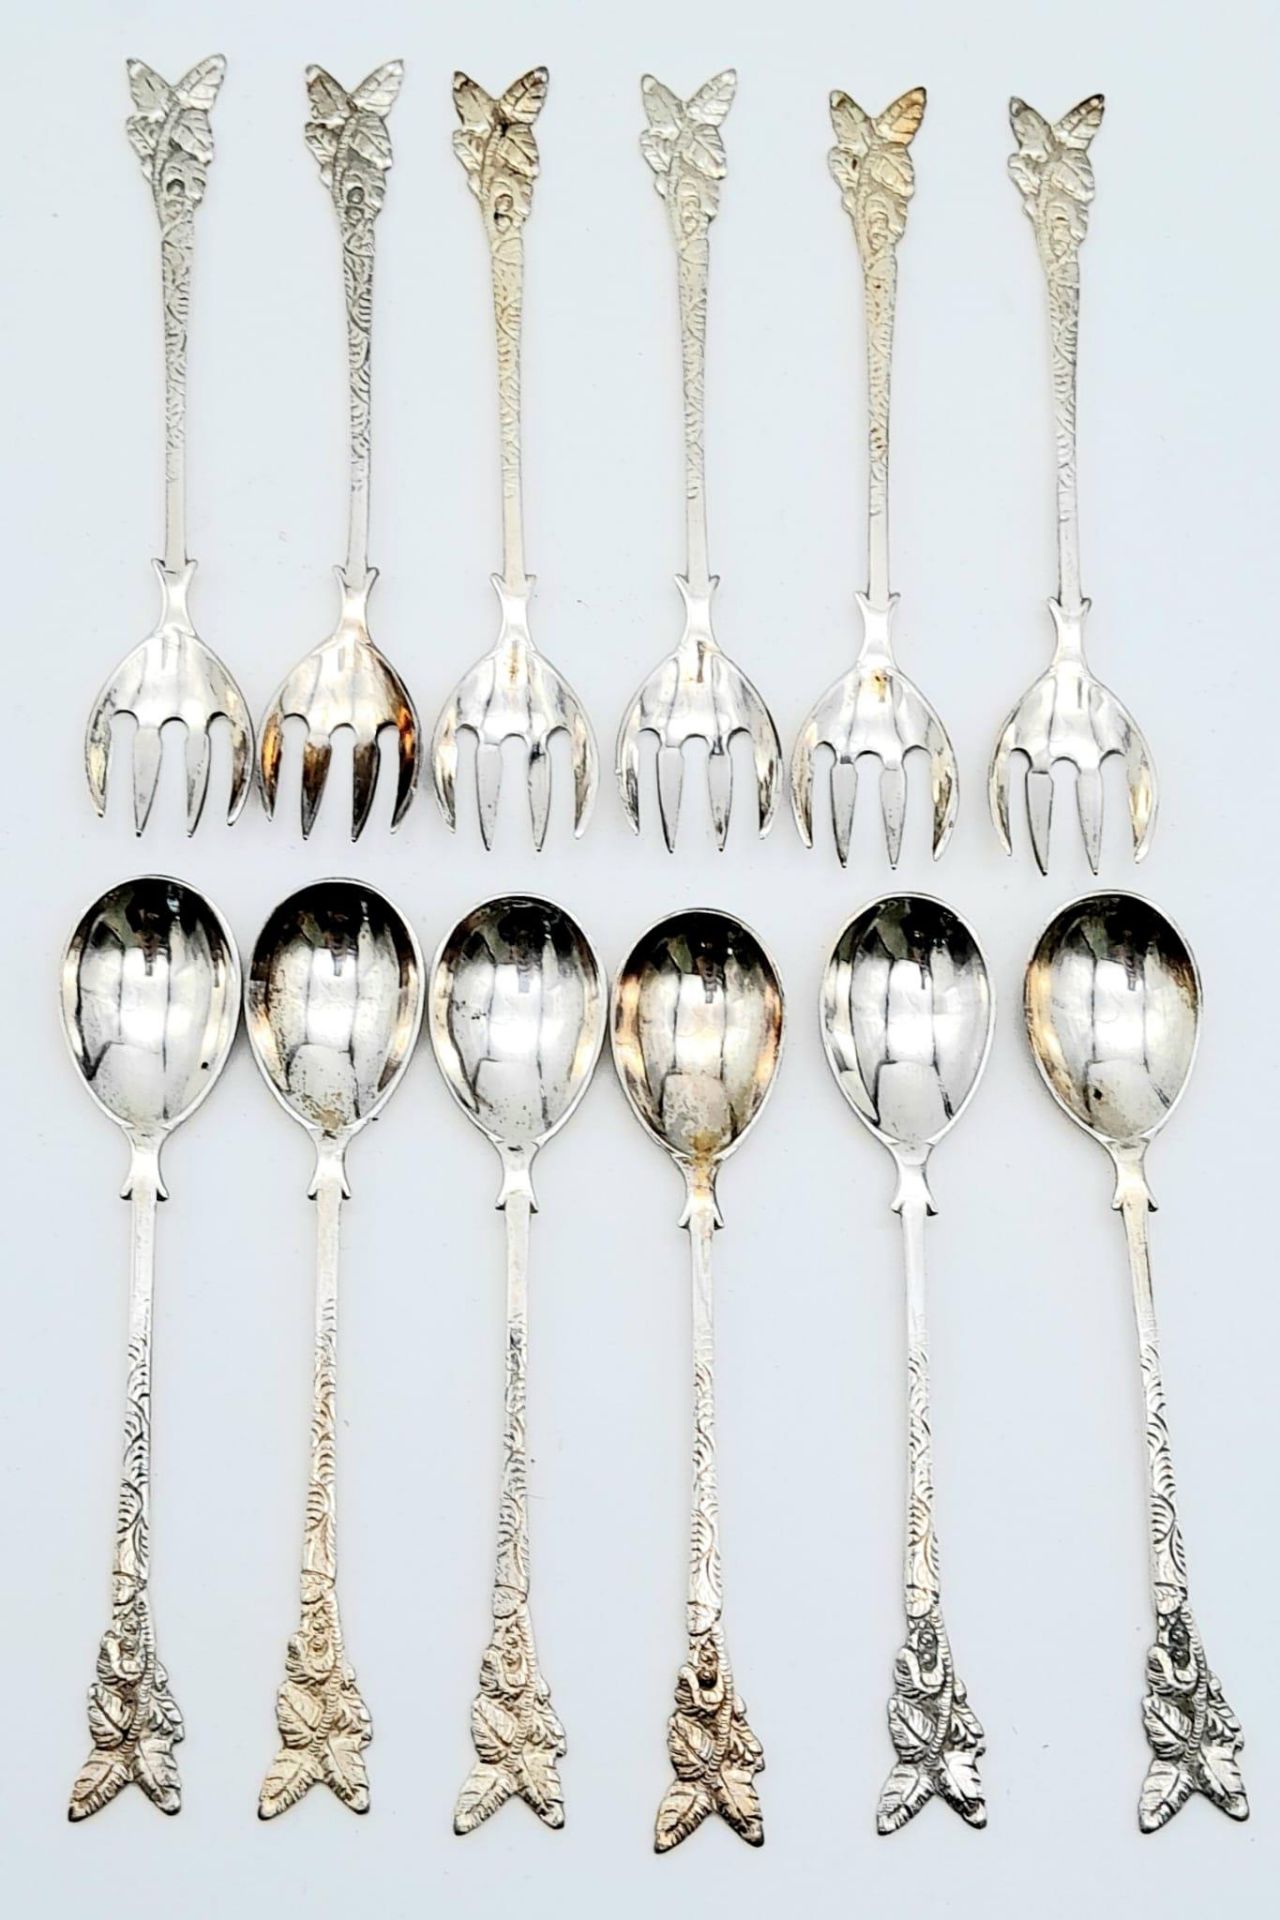 Parcel of antique silver cutlery. Featuring six ornately handled spoons and six forks. Stamped